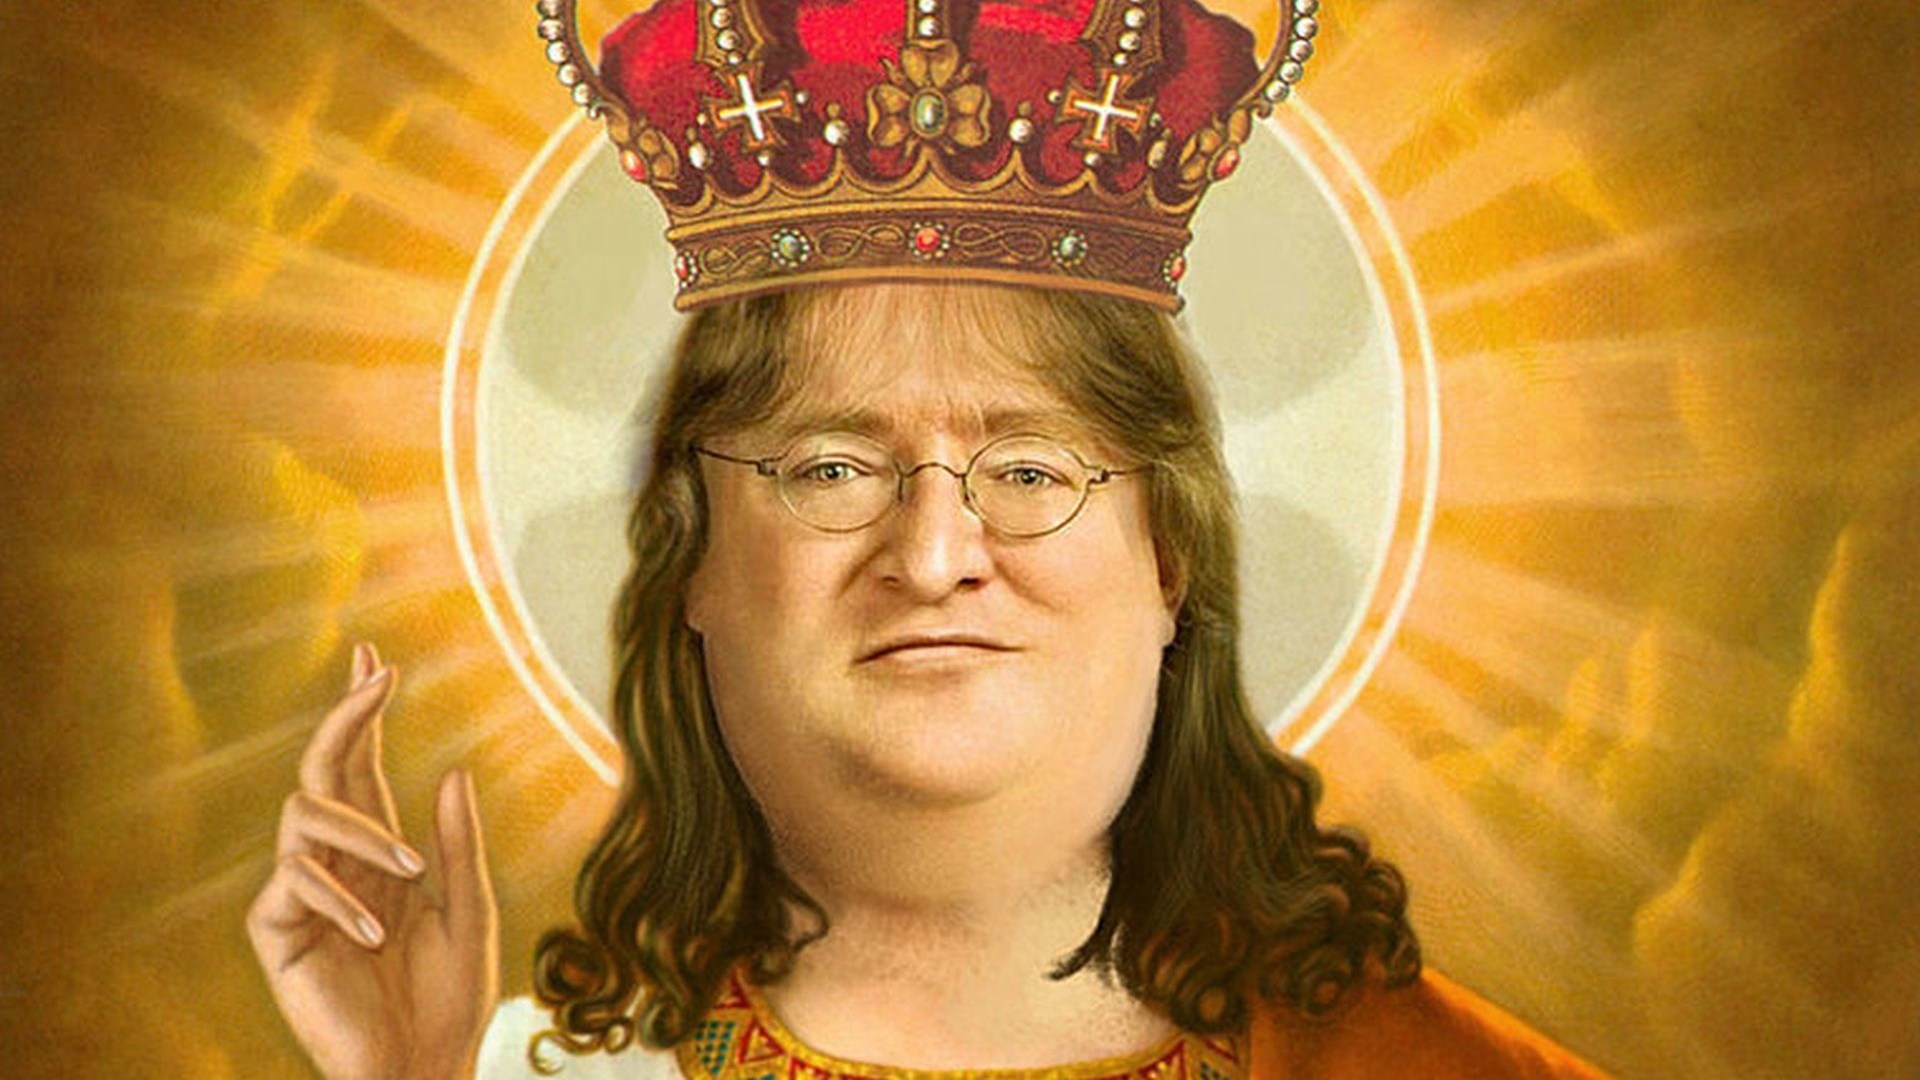 Gabe Newell Addresses the Community (About Hacking, Not Half-Life